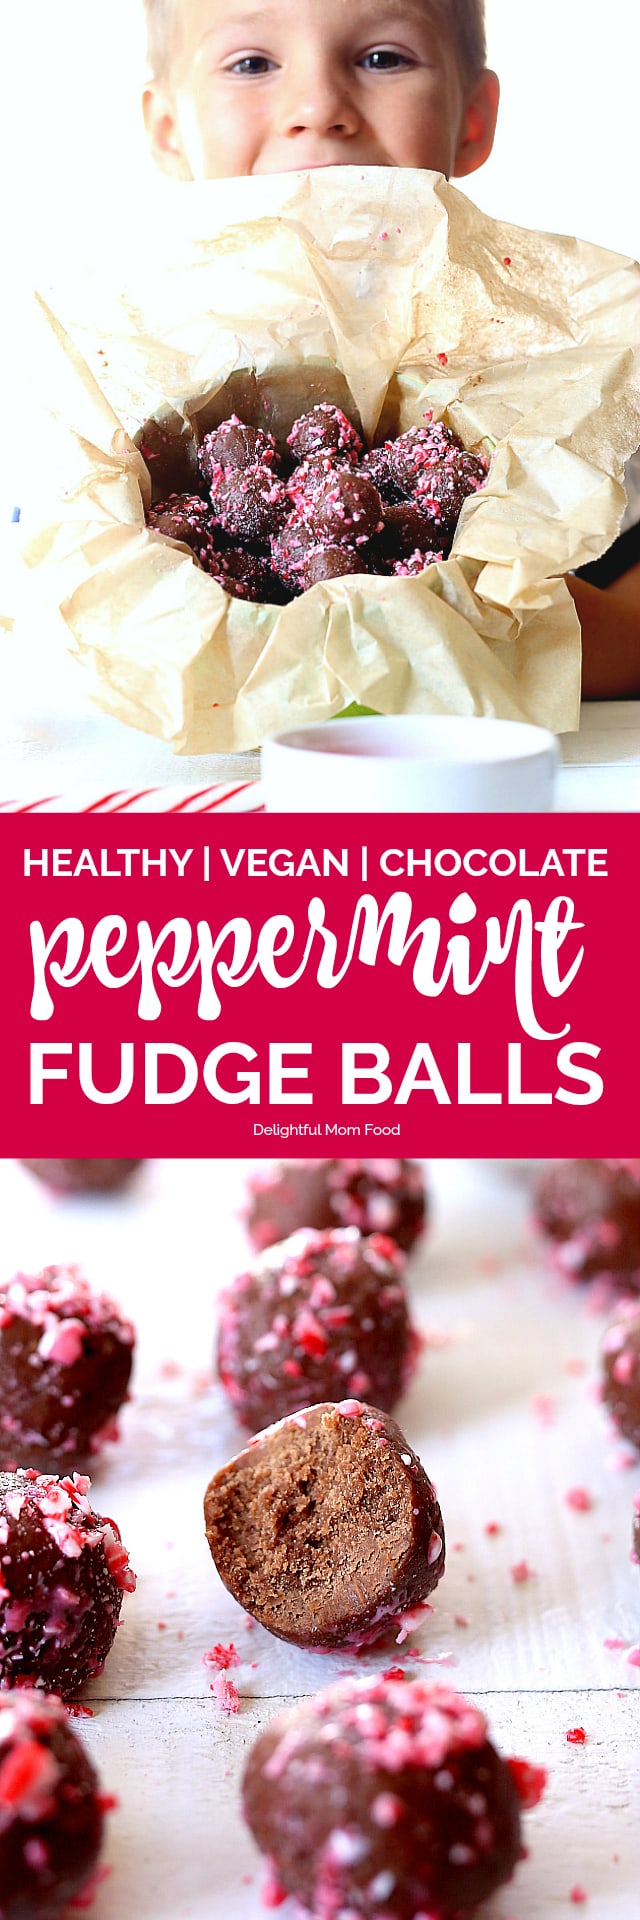 Healthy chocolate fudge balls made raw and coated with crunchy peppermint candy cane pieces. A delicious combination of chocolate cocoa powder, maple syrup, coconut oil, vanilla and gluten-free flour rolled into delicious chewy vegan balls - perfect for the holidays!